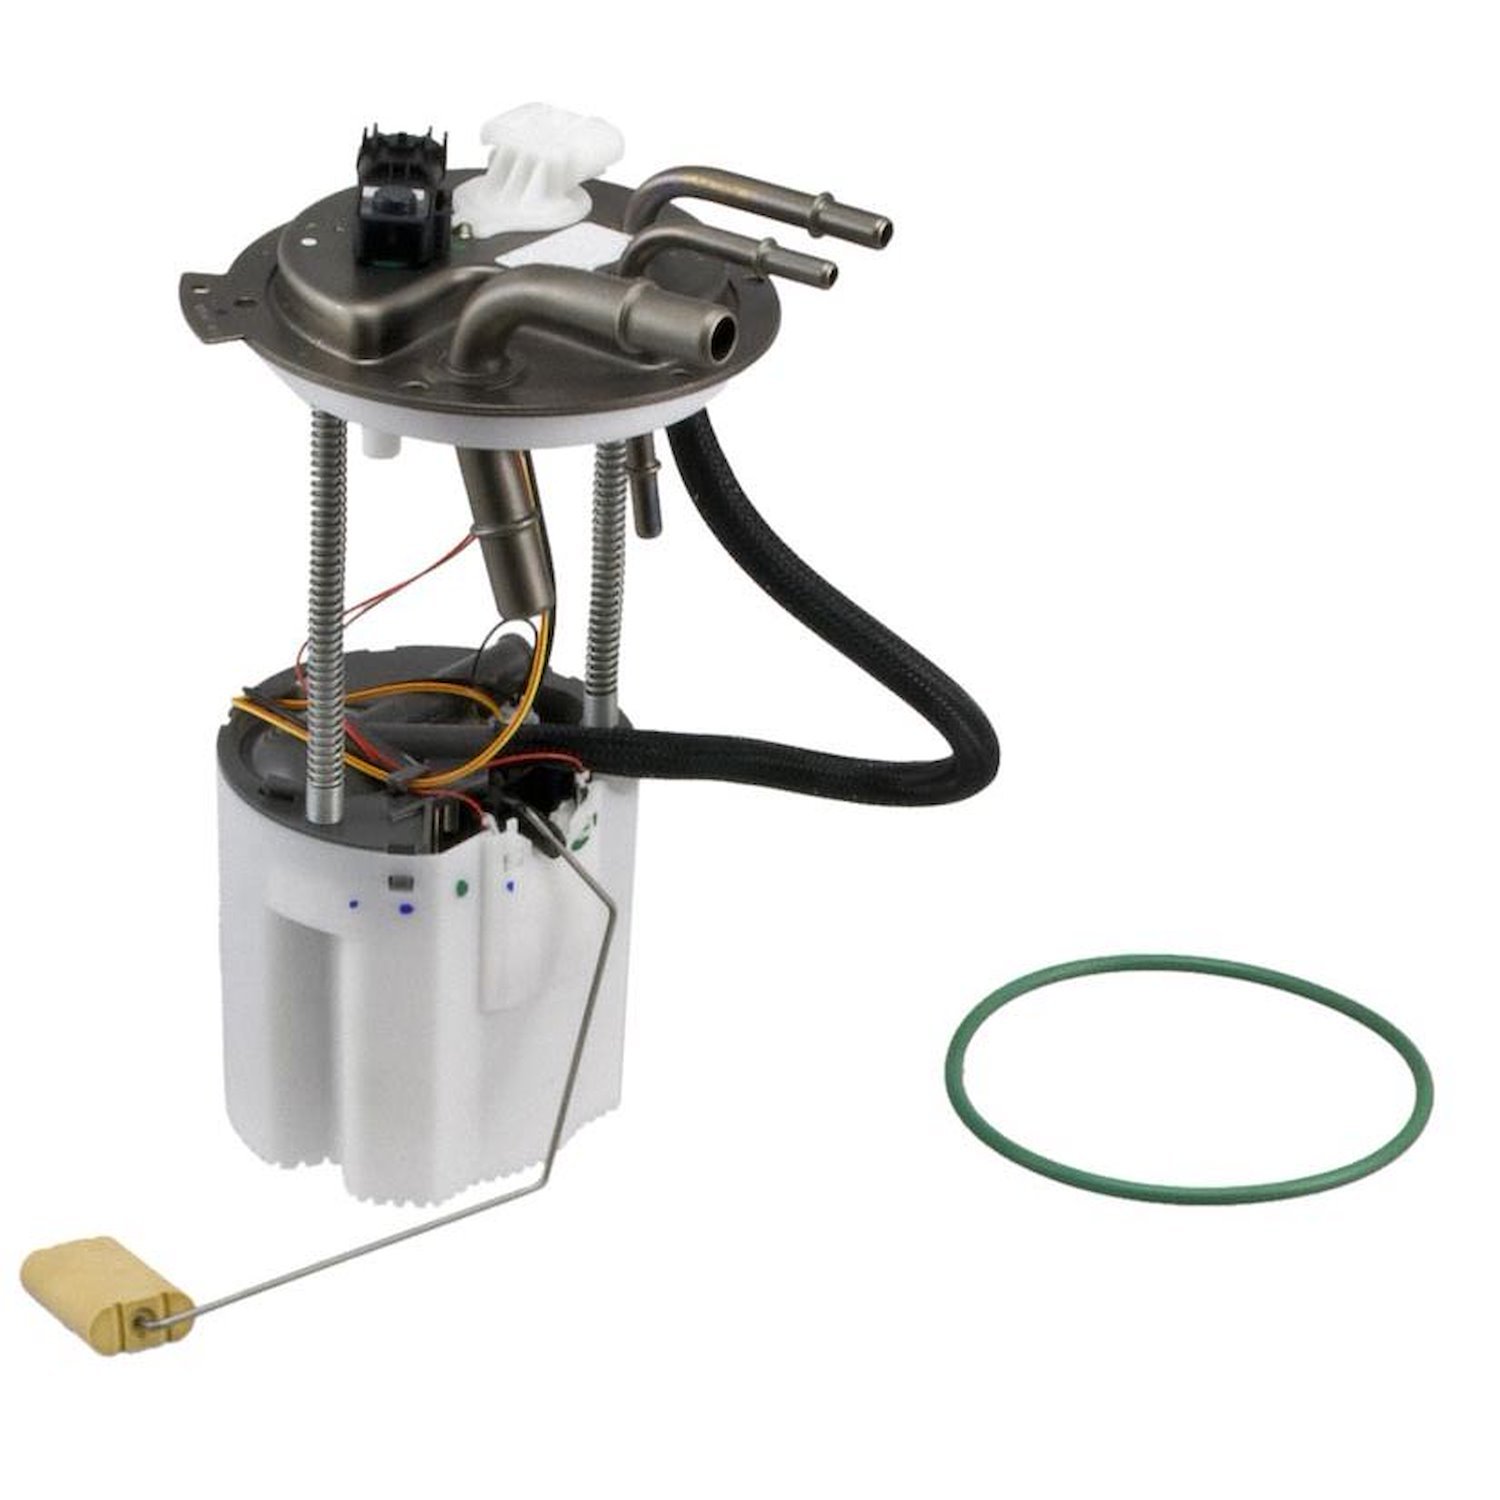 OE GM Replacement Fuel Pump Module Assembly for 2008-2013 Cadillac Escalade/Chevy Tahoe/GMC Yukon